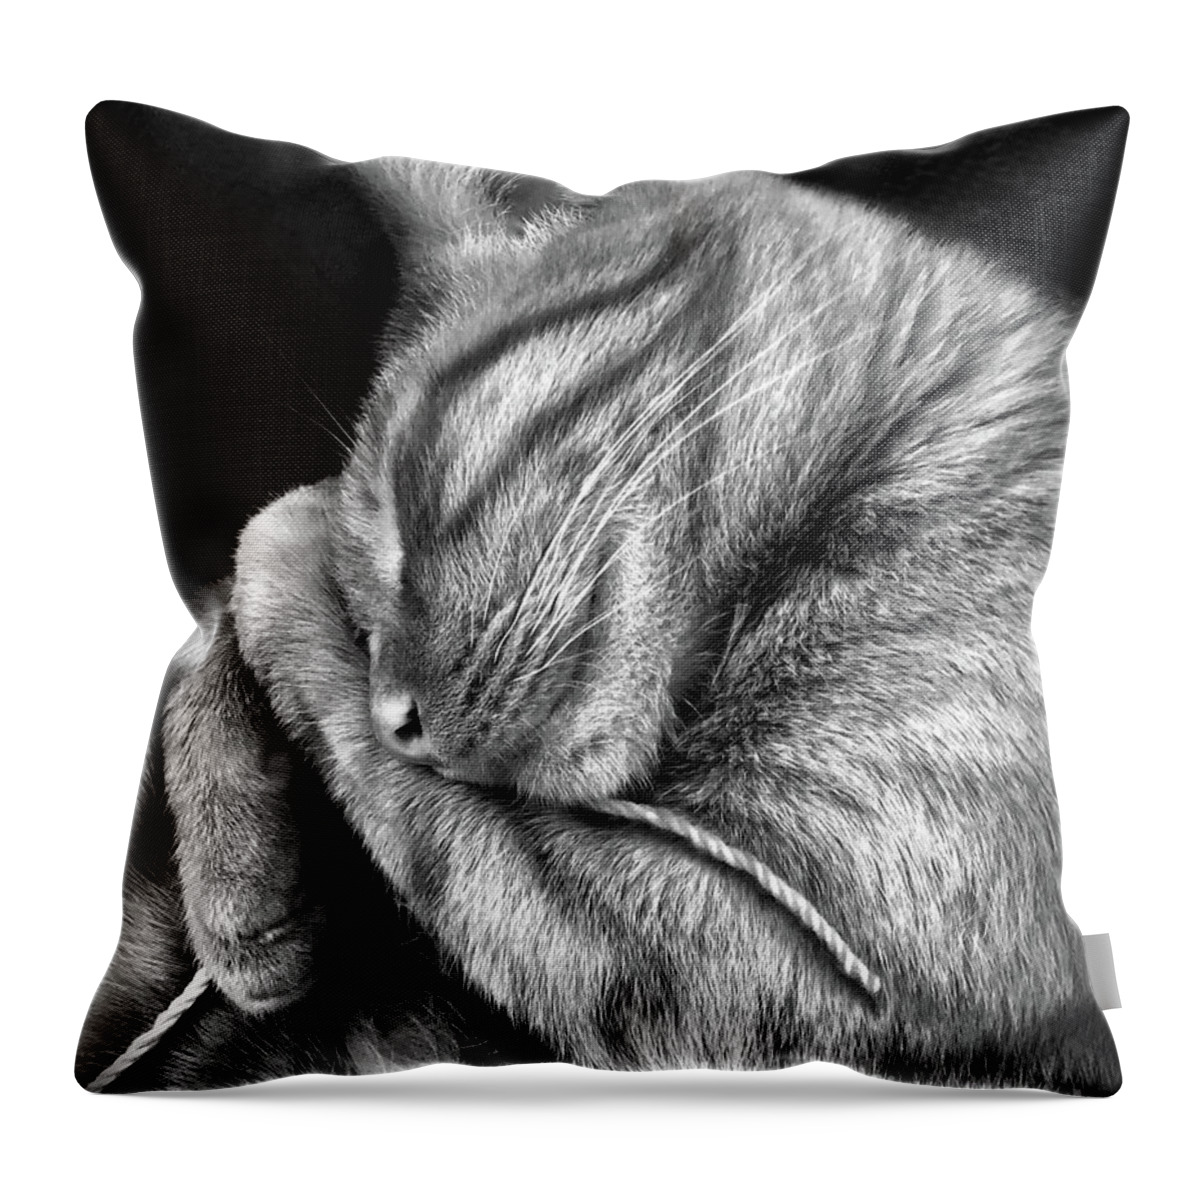 Cat With String Throw Pillow featuring the photograph I Shall Call Him Stringy by Shevon Johnson